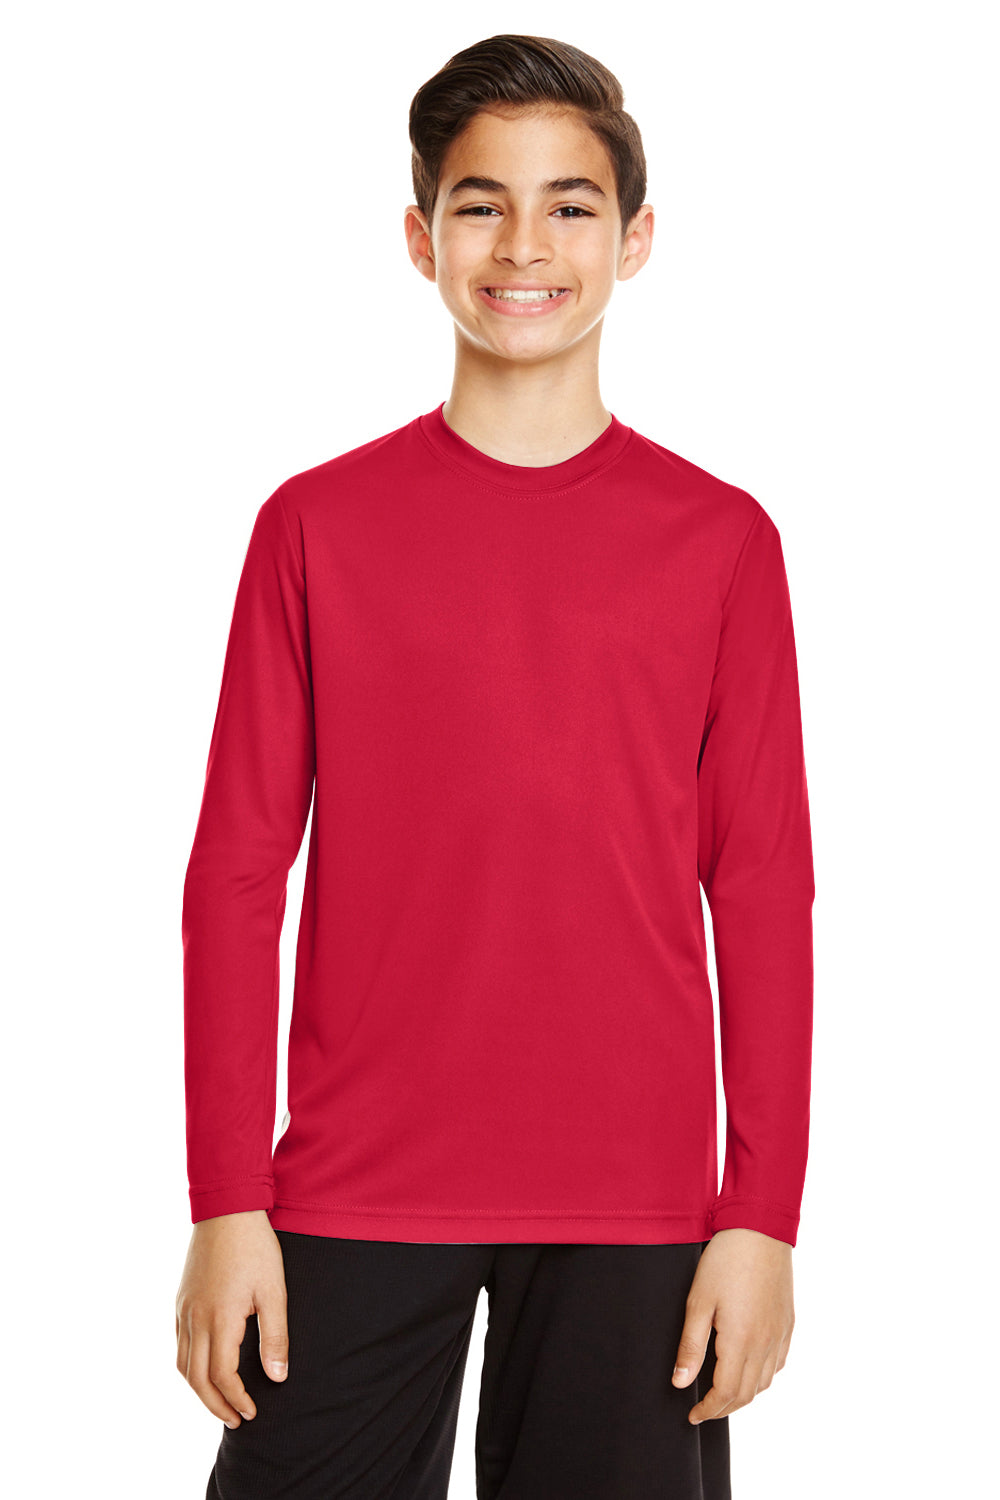 Team 365 TT11YL Youth Zone Performance Moisture Wicking Long Sleeve Crewneck T-Shirt Red Front